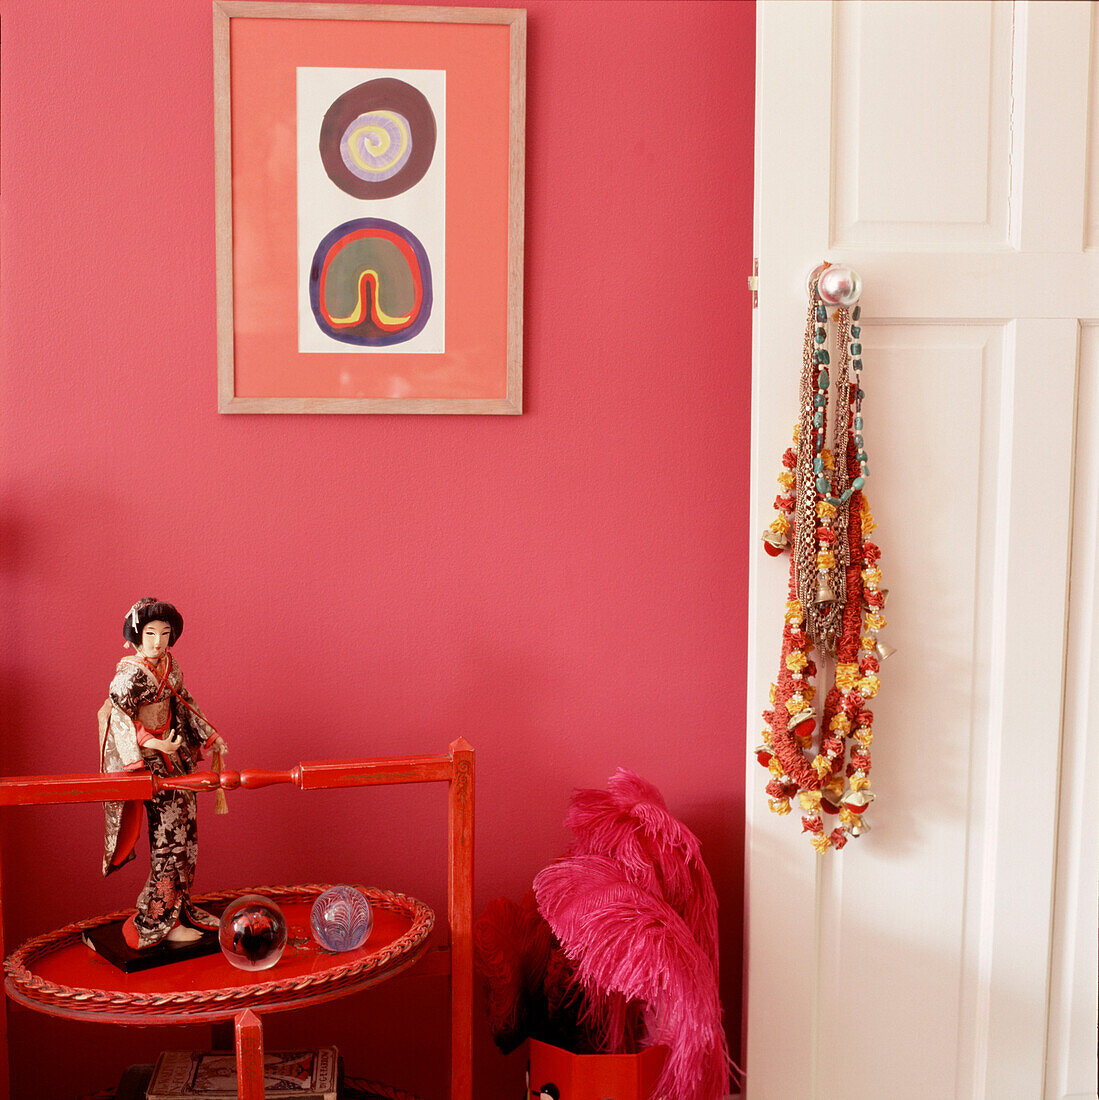 Entrance to woman's bedroom with ornaments and pink walls